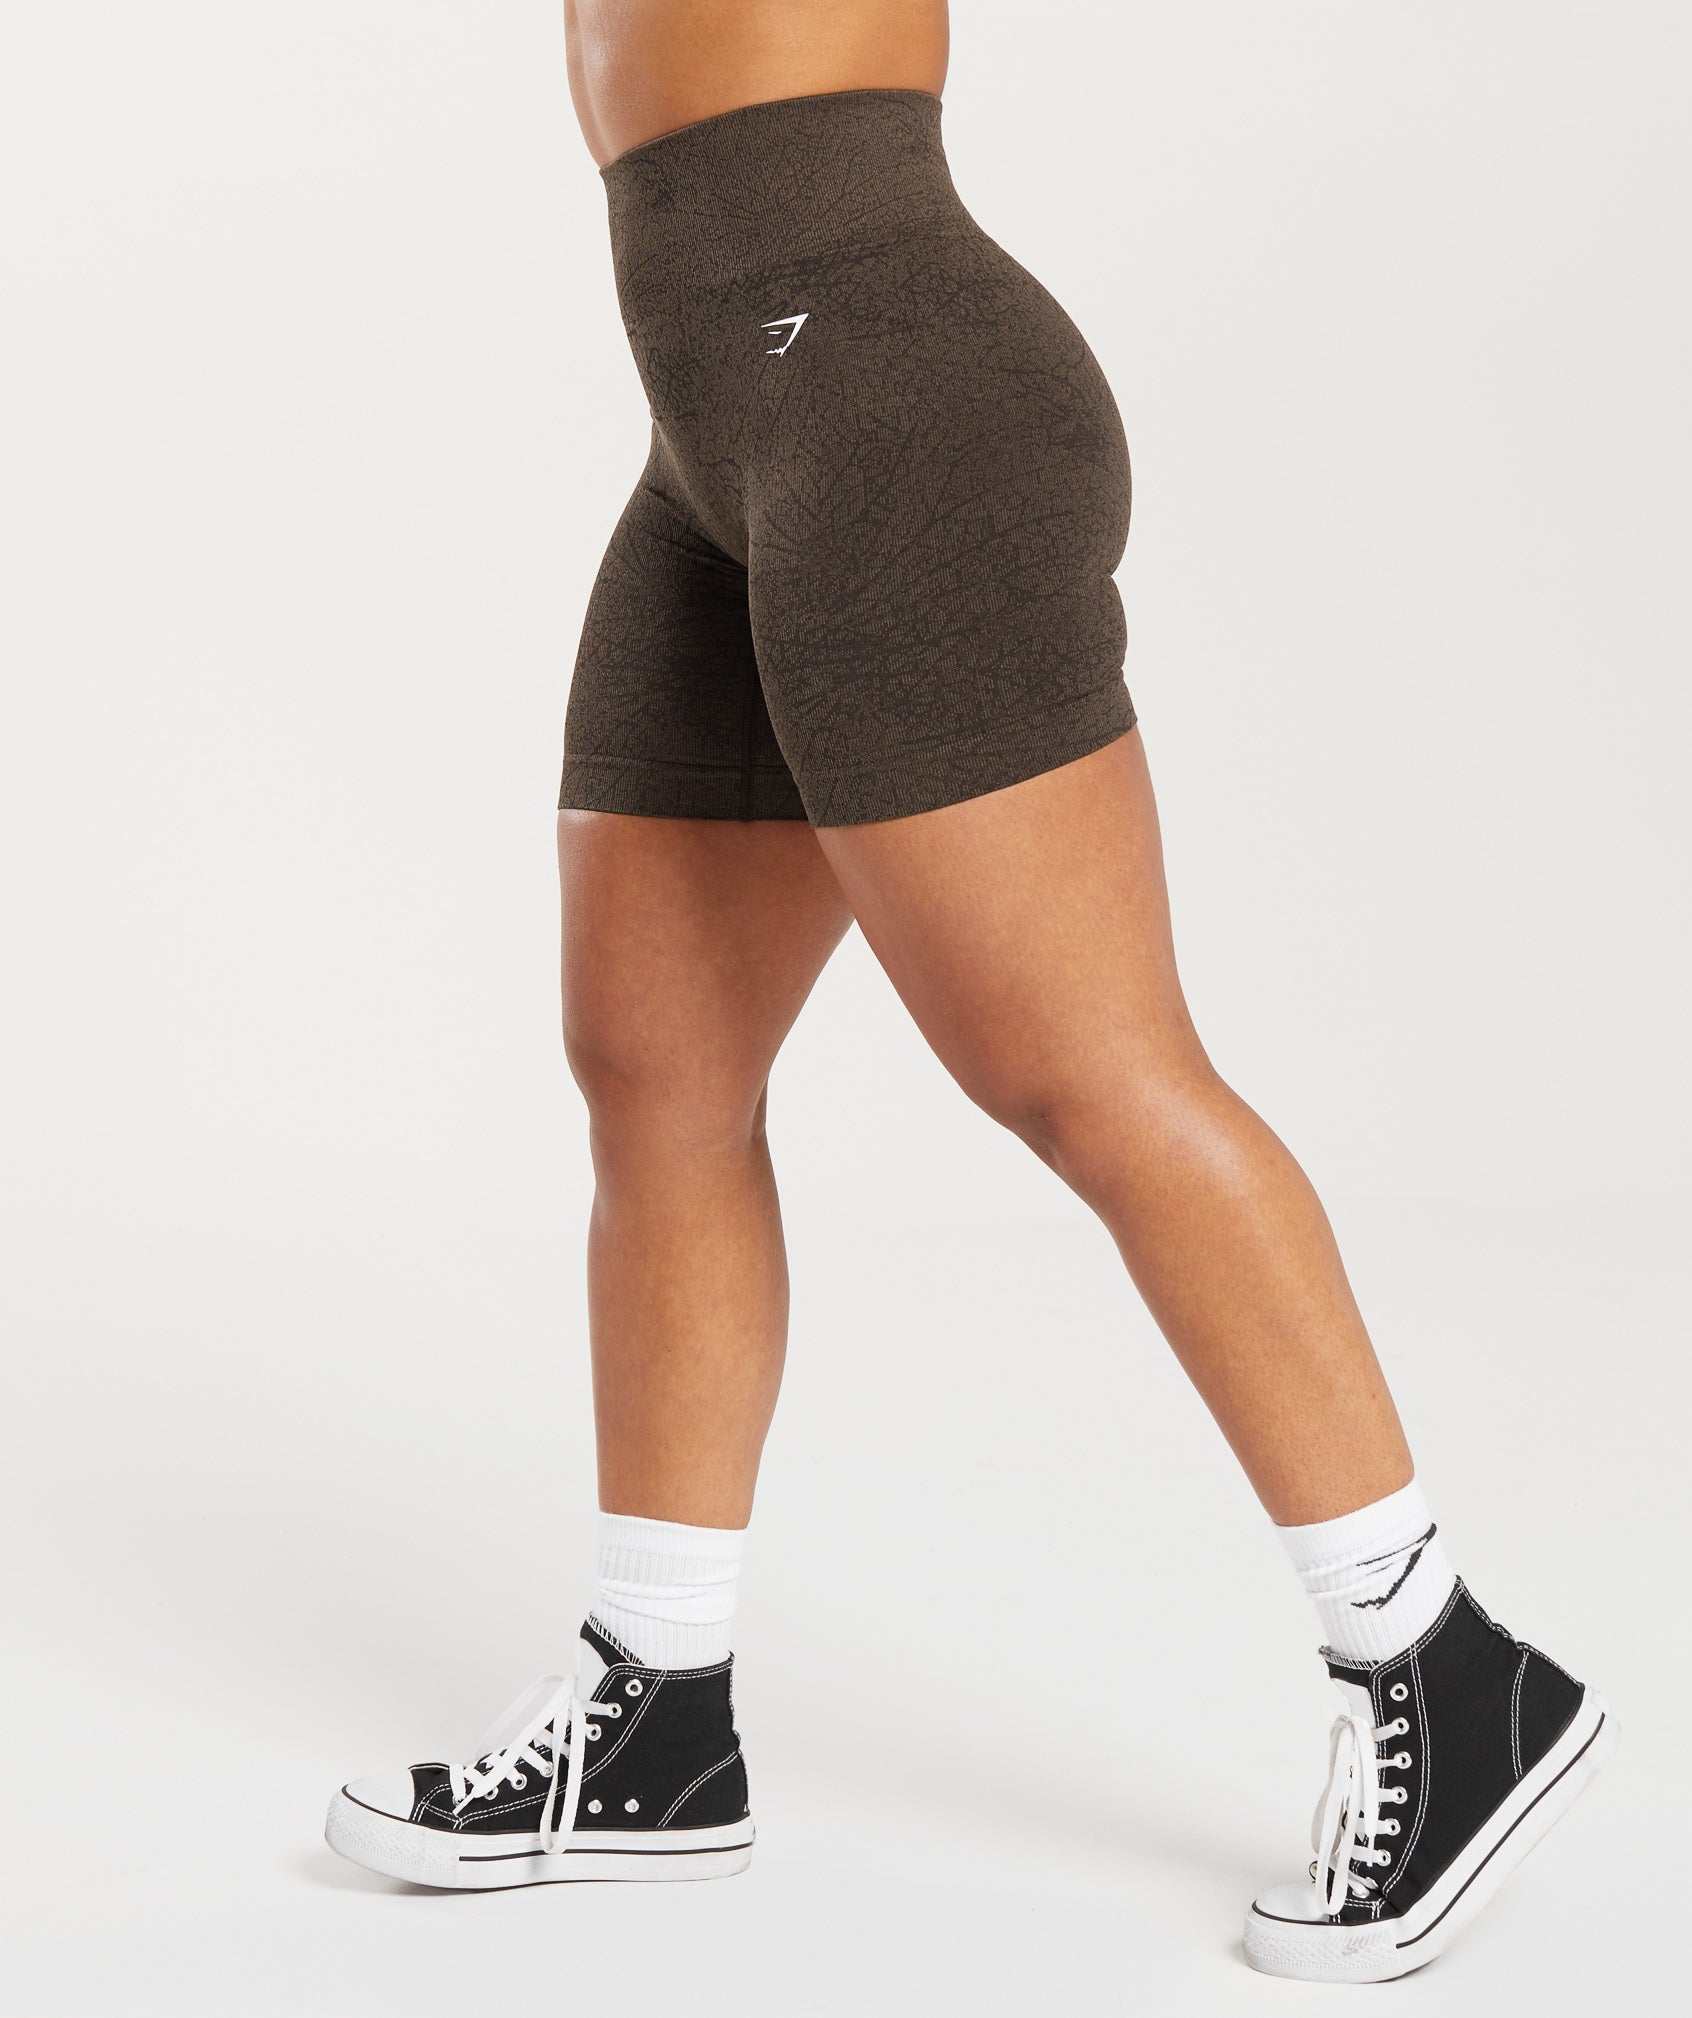 Adapt Pattern Seamless Shorts in Woodland Brown/Soul Brown - view 3